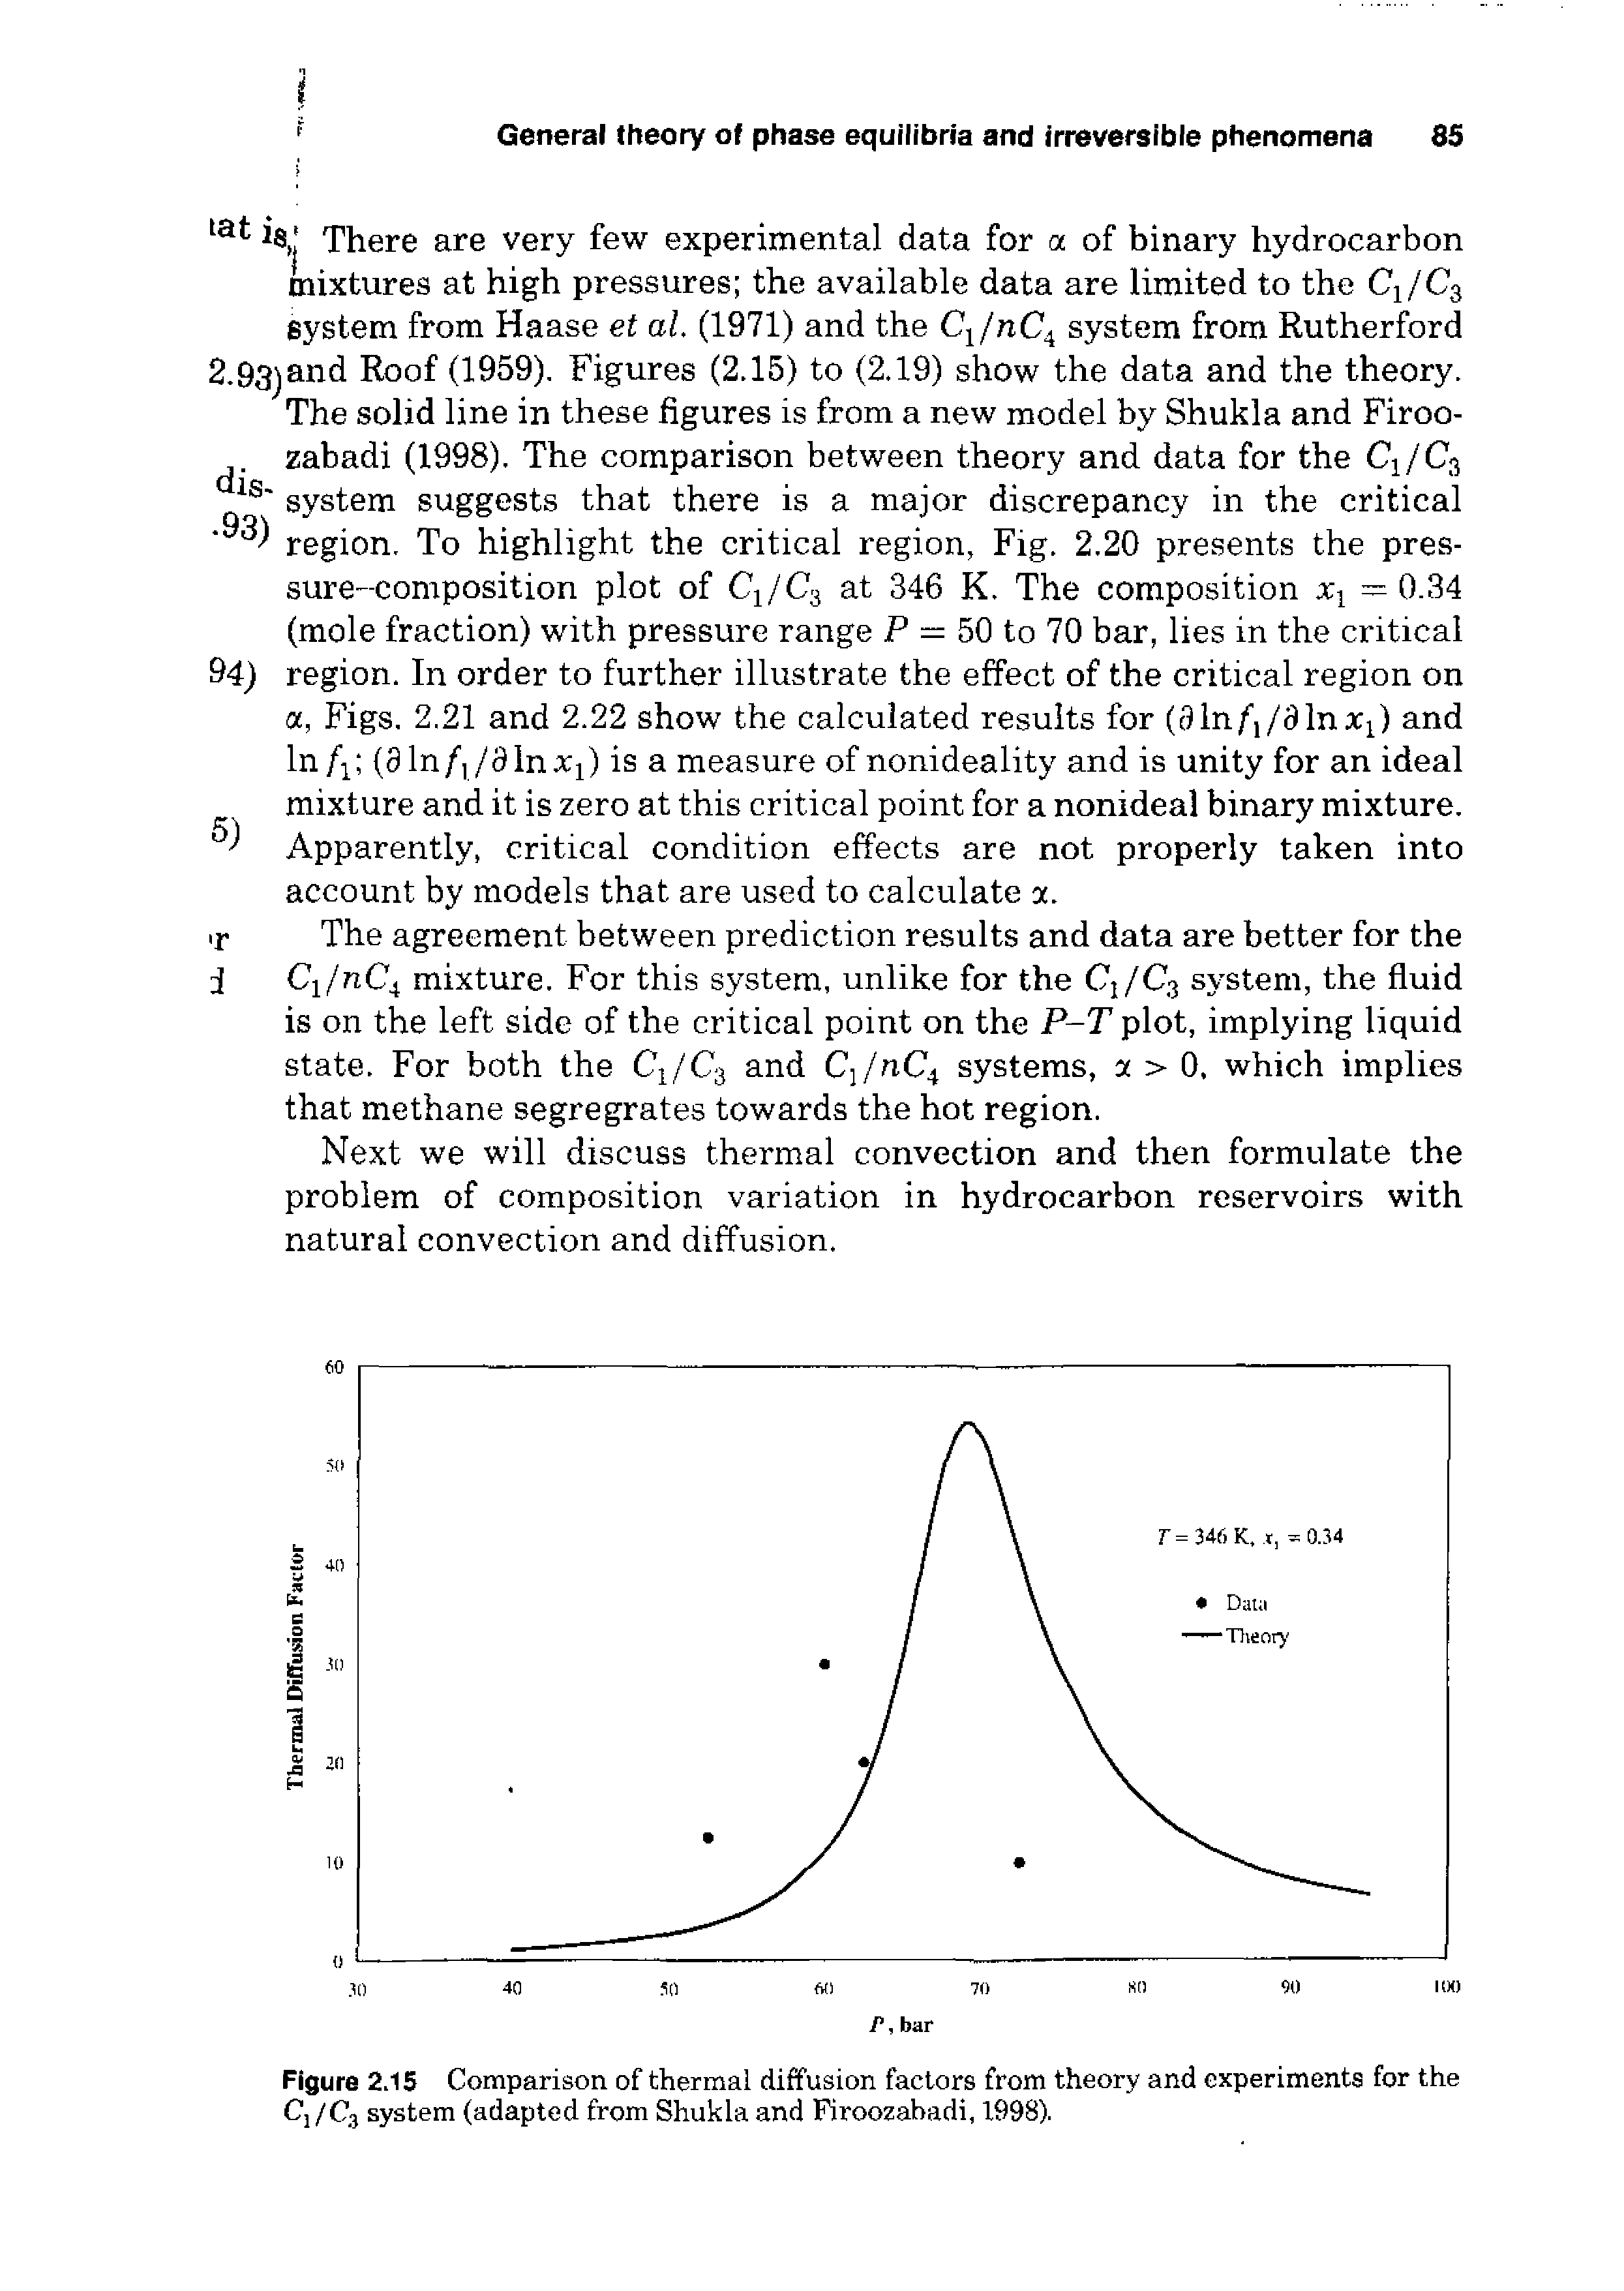 Figure 2.15 Comparison of thermal diffusion factors from theory and experiments for the Cj/Cg system (adapted from Shukla and Firoozahadi, 1998).